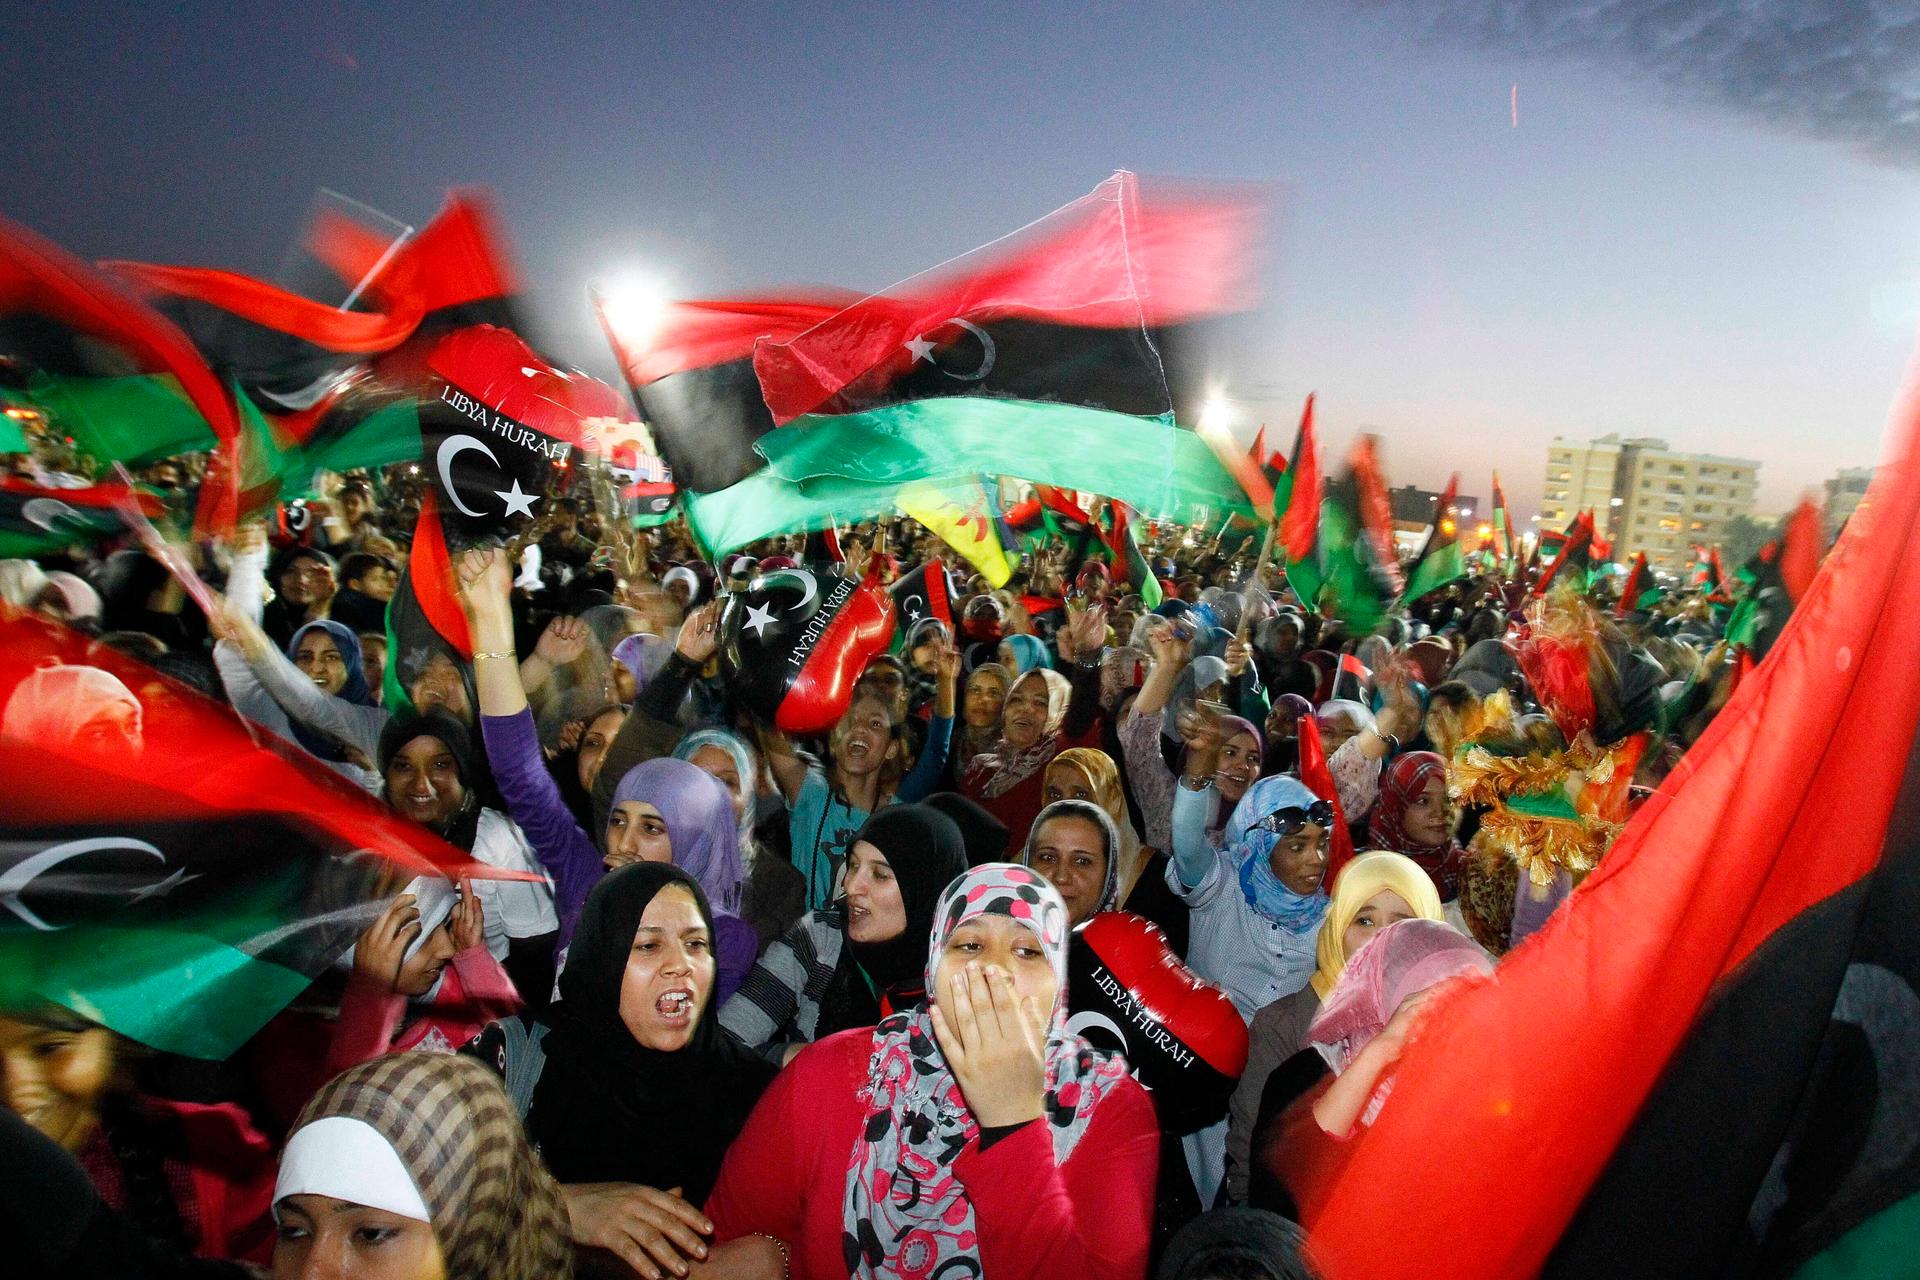 In this Sunday Oct. 23, 2011 file photo, Libyan celebrate at Saha Kish Square in Benghazi, Libya, as Libya's transitional government declares the official liberation of Libya after months of bloodshed that culminated in the death of longtime leader Moamma